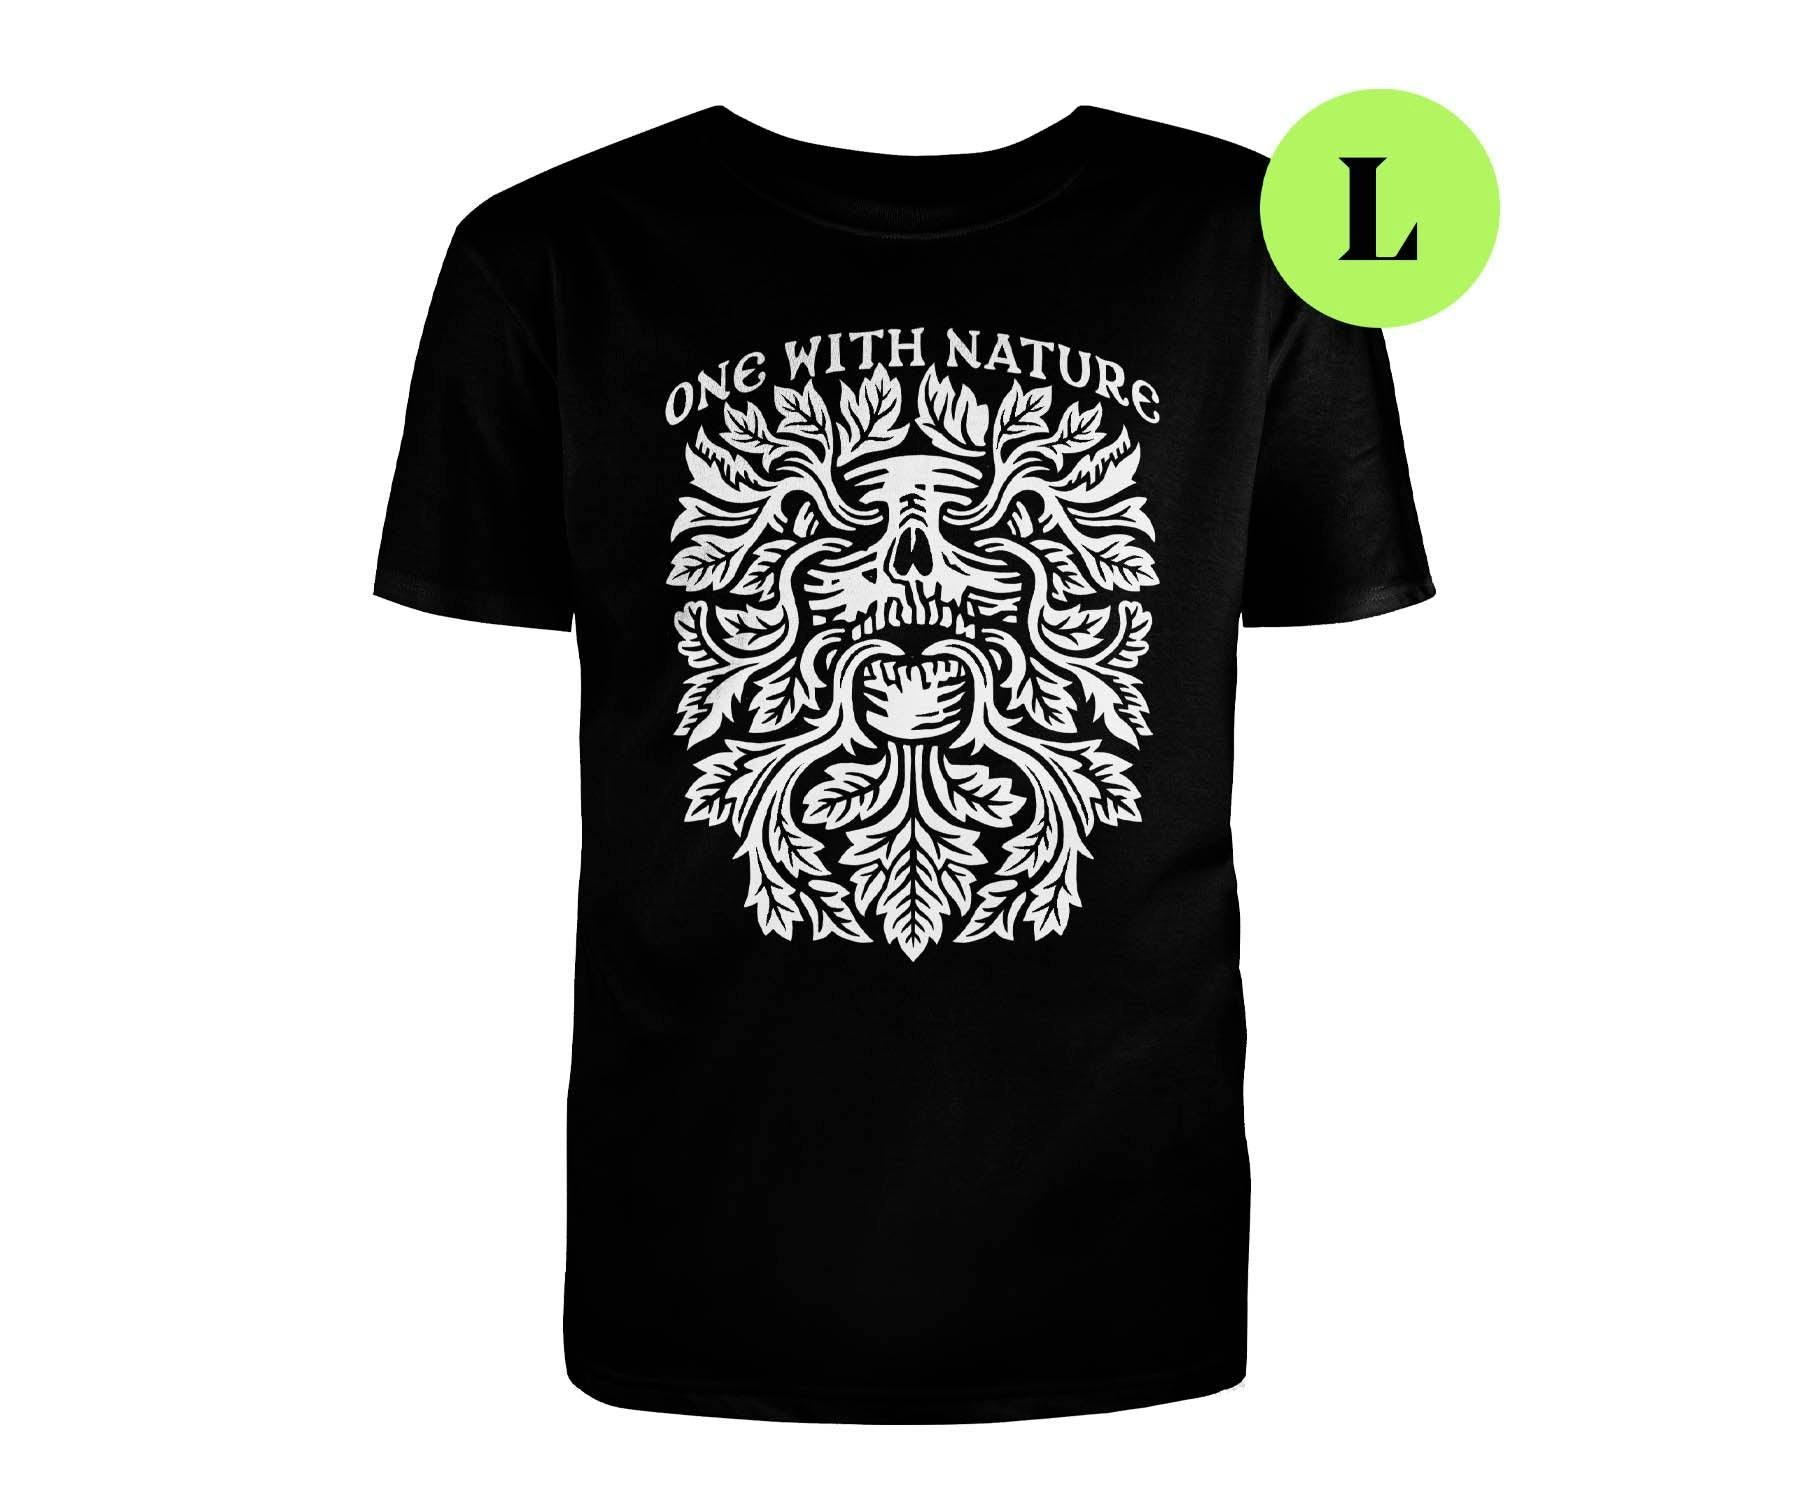 'One With Nature' T-Shirt Only (L)